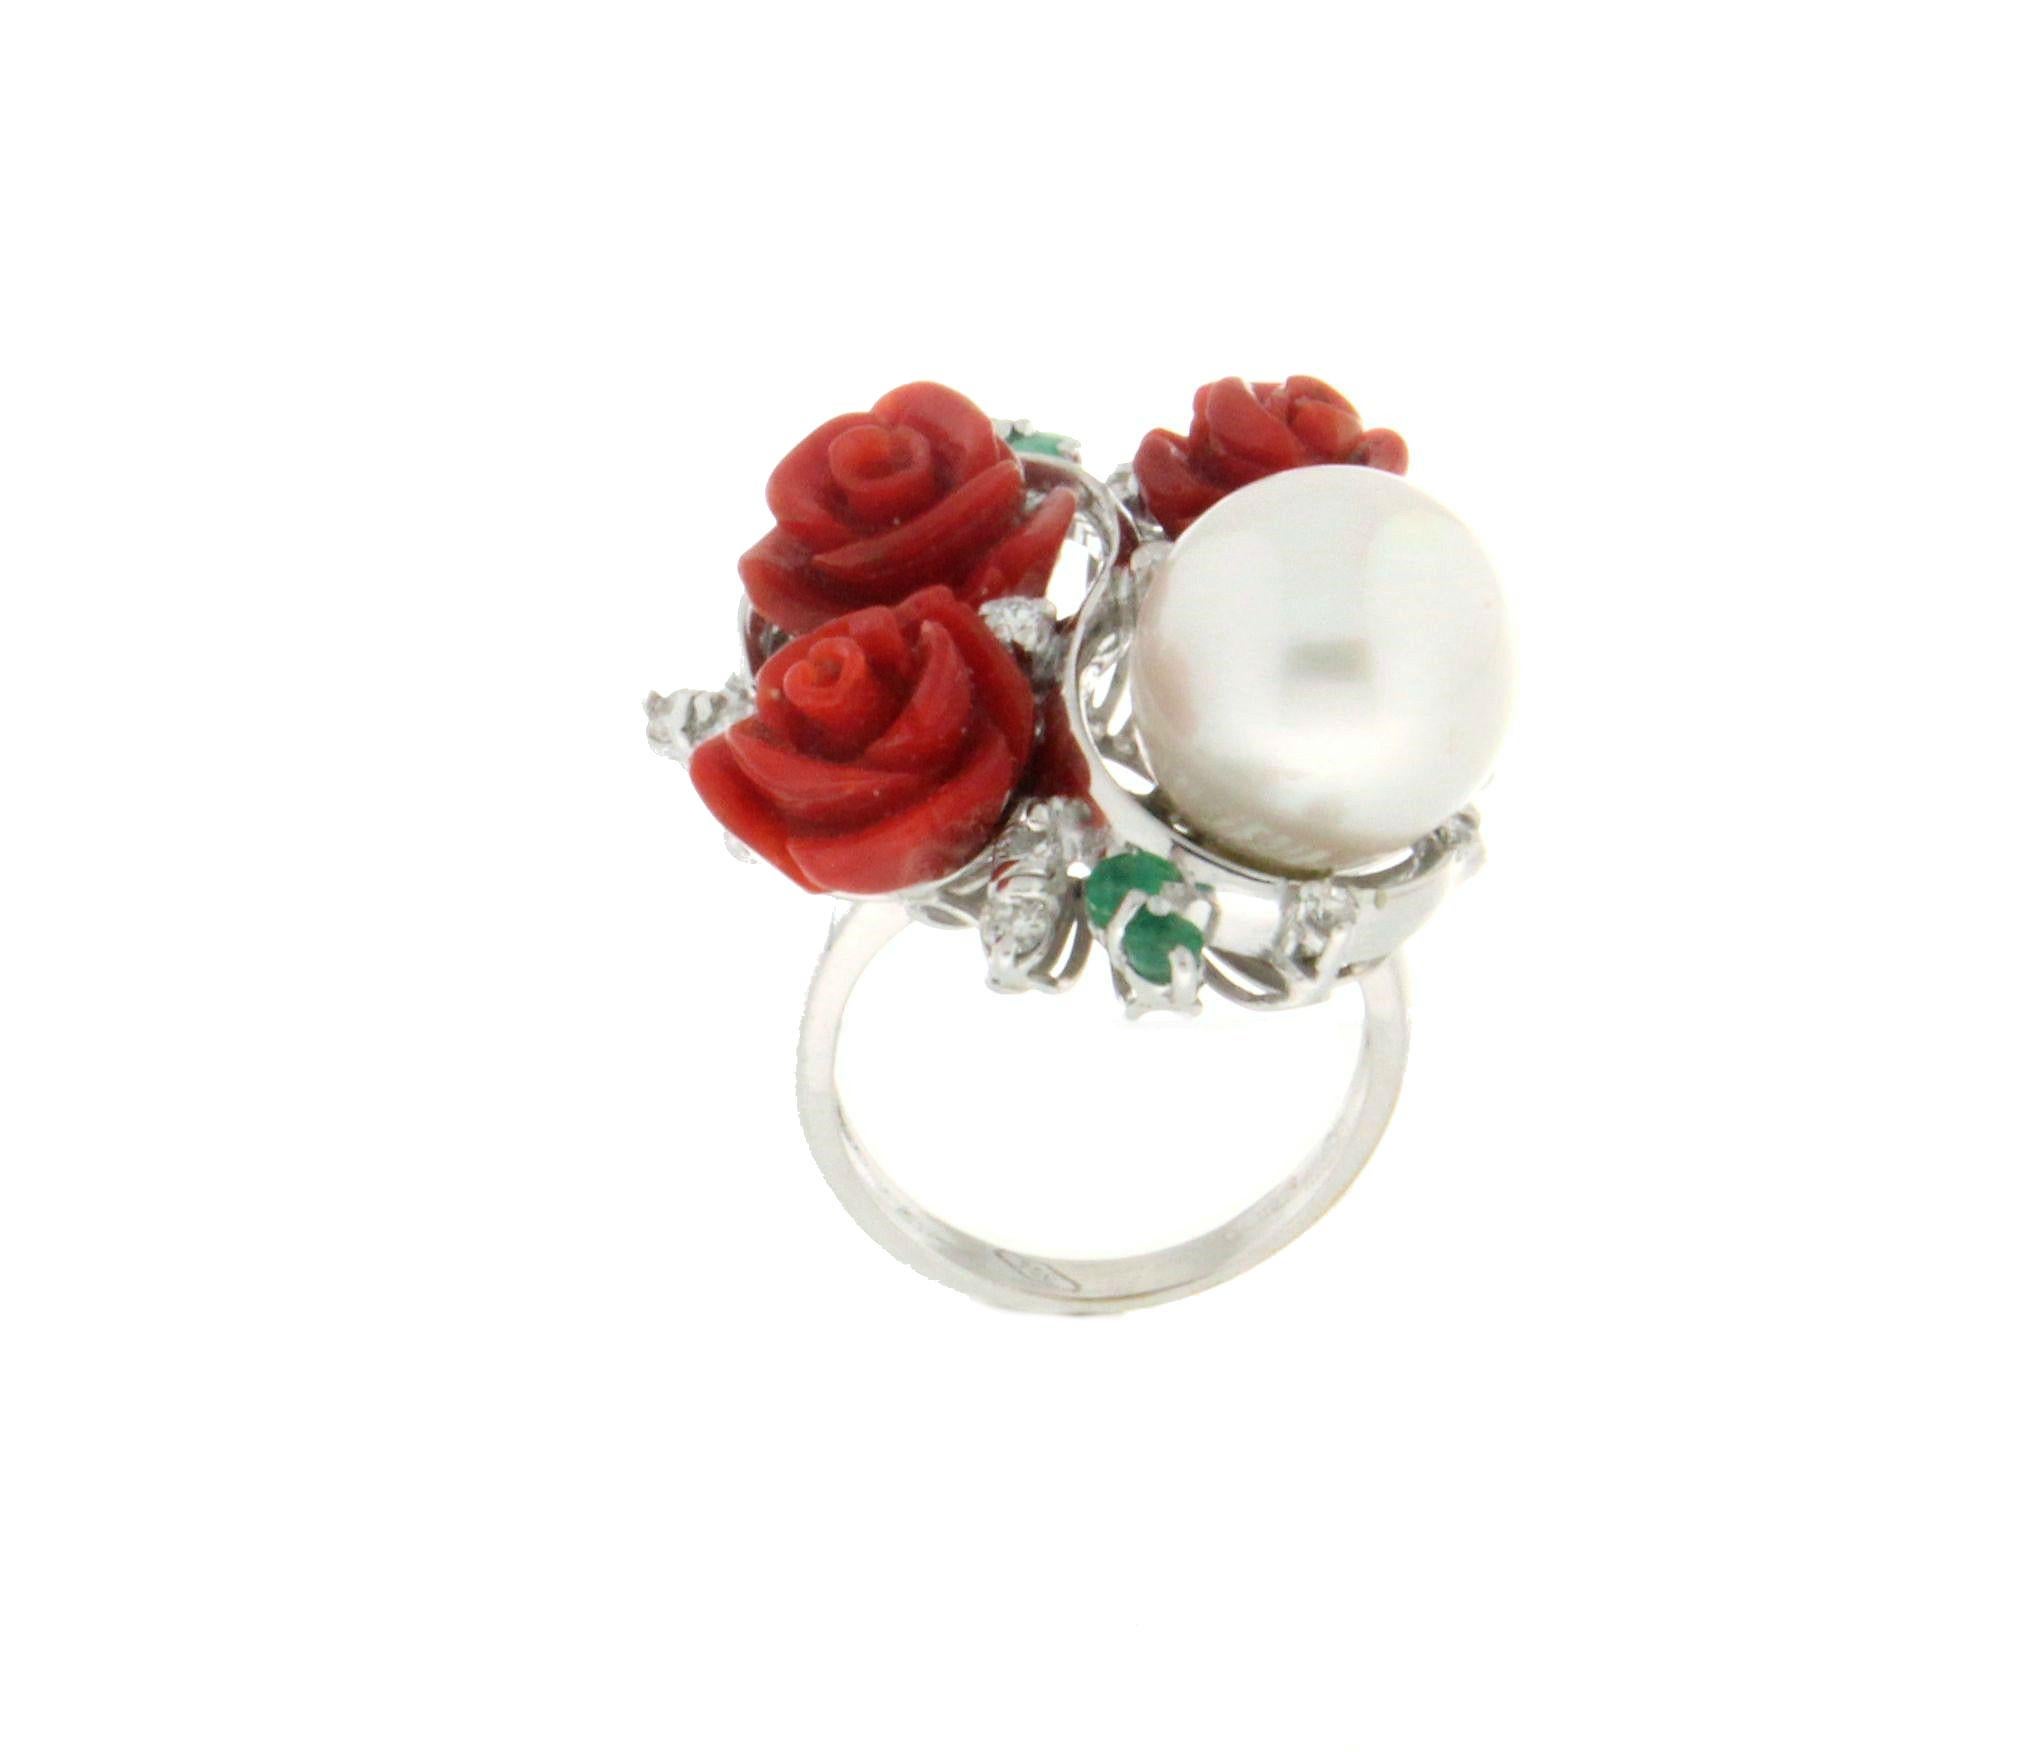 Mixed Cut Handcraft Coral Flowers 18 Karat White Gold Pearl Diamonds Cocktail Ring